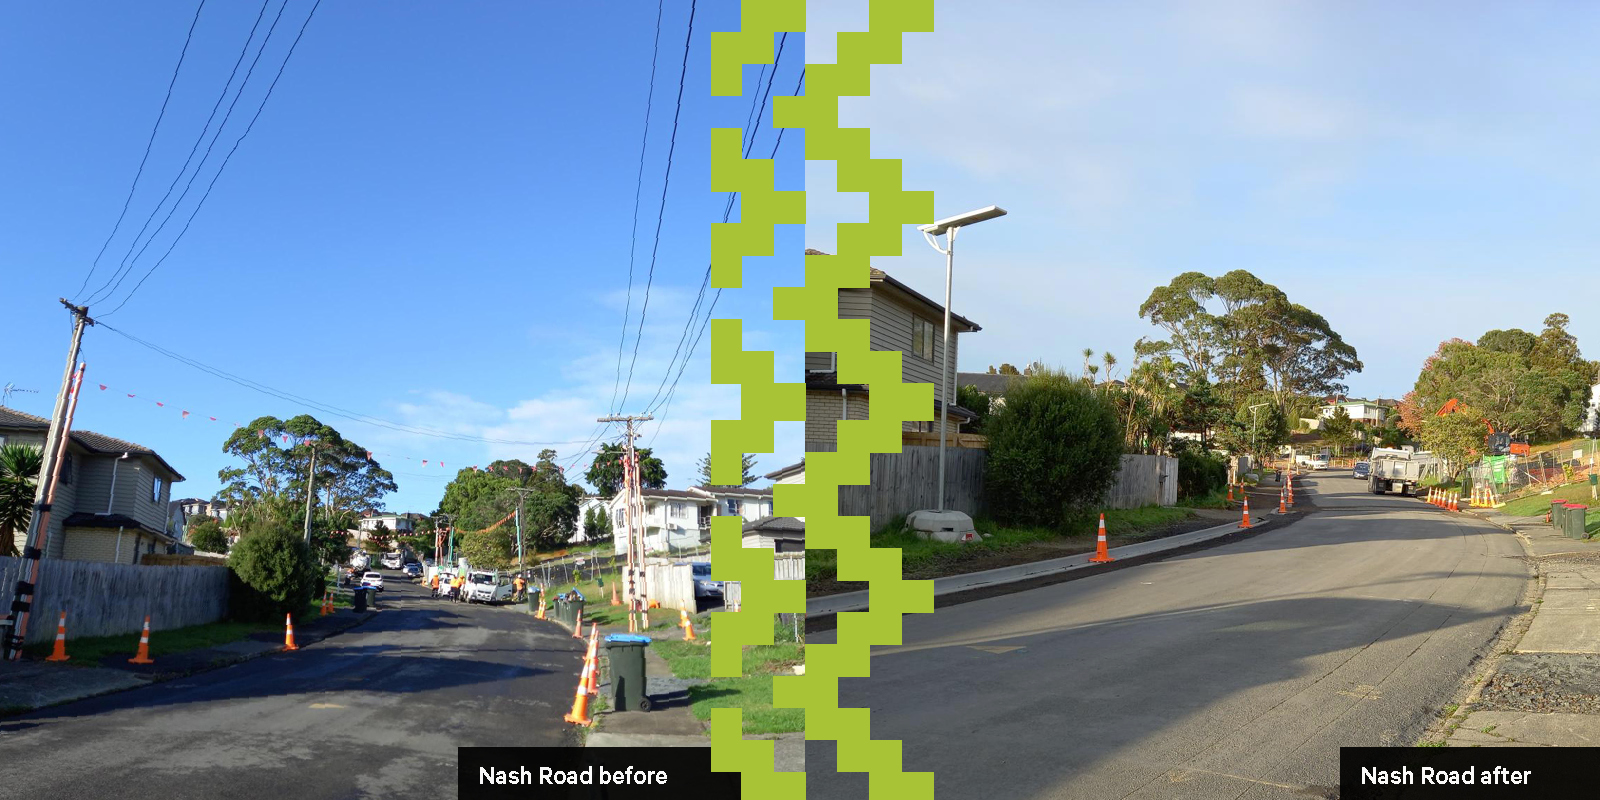 J001348 RK1 Waikowhai Powerlines Before and After BLOG tiles 1600x800 1IT v3